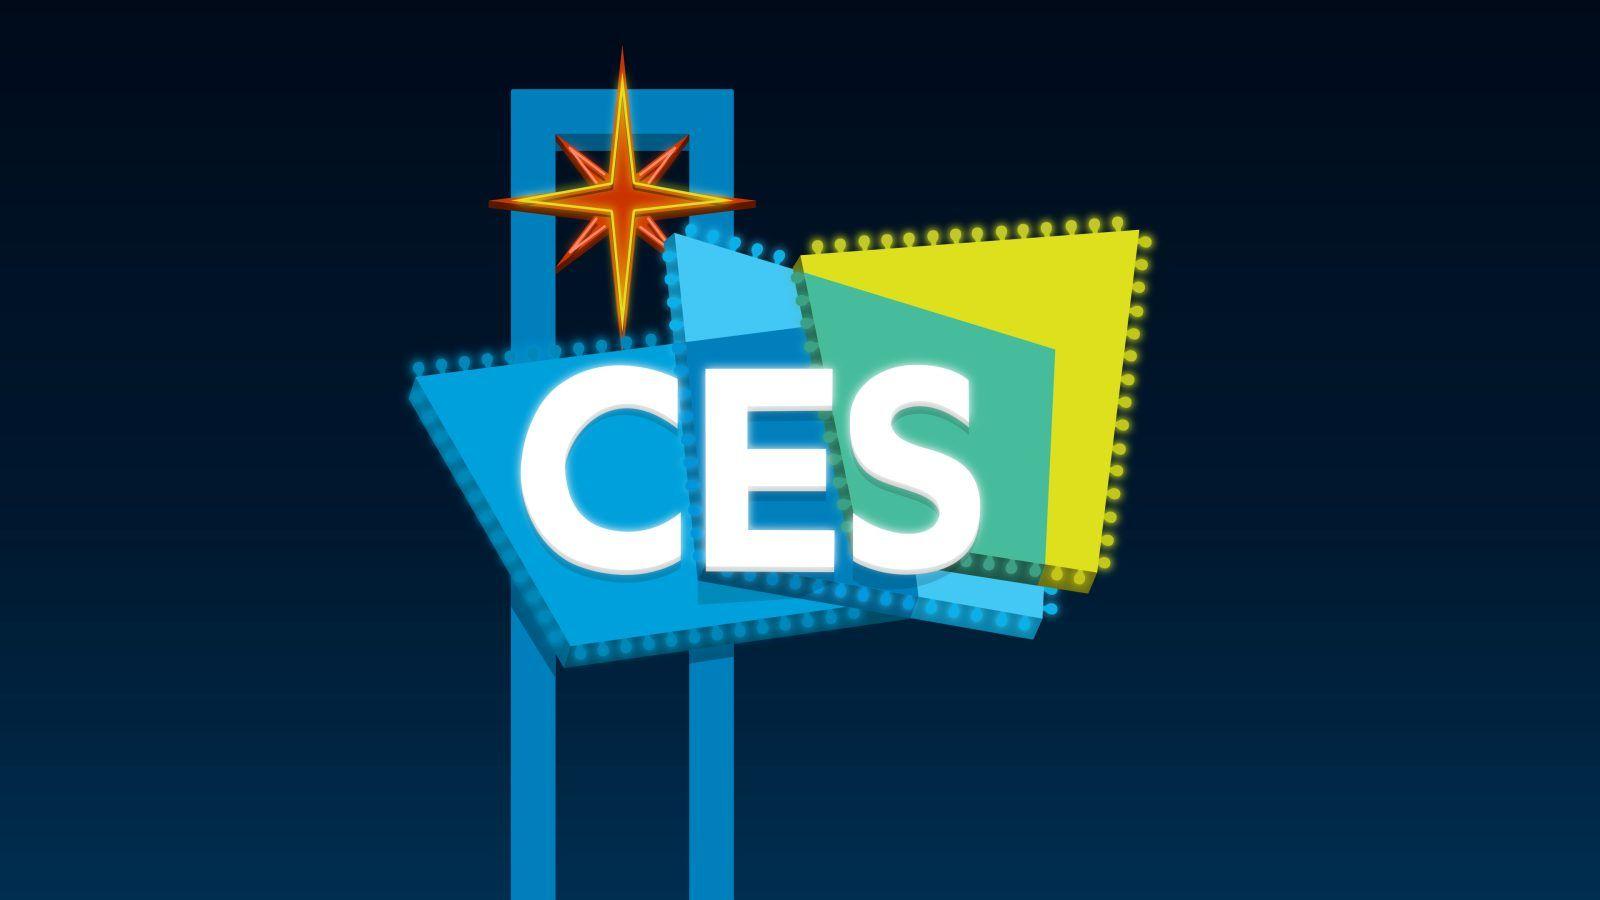 CES 2019 Wallpapers - Wallpaper Cave